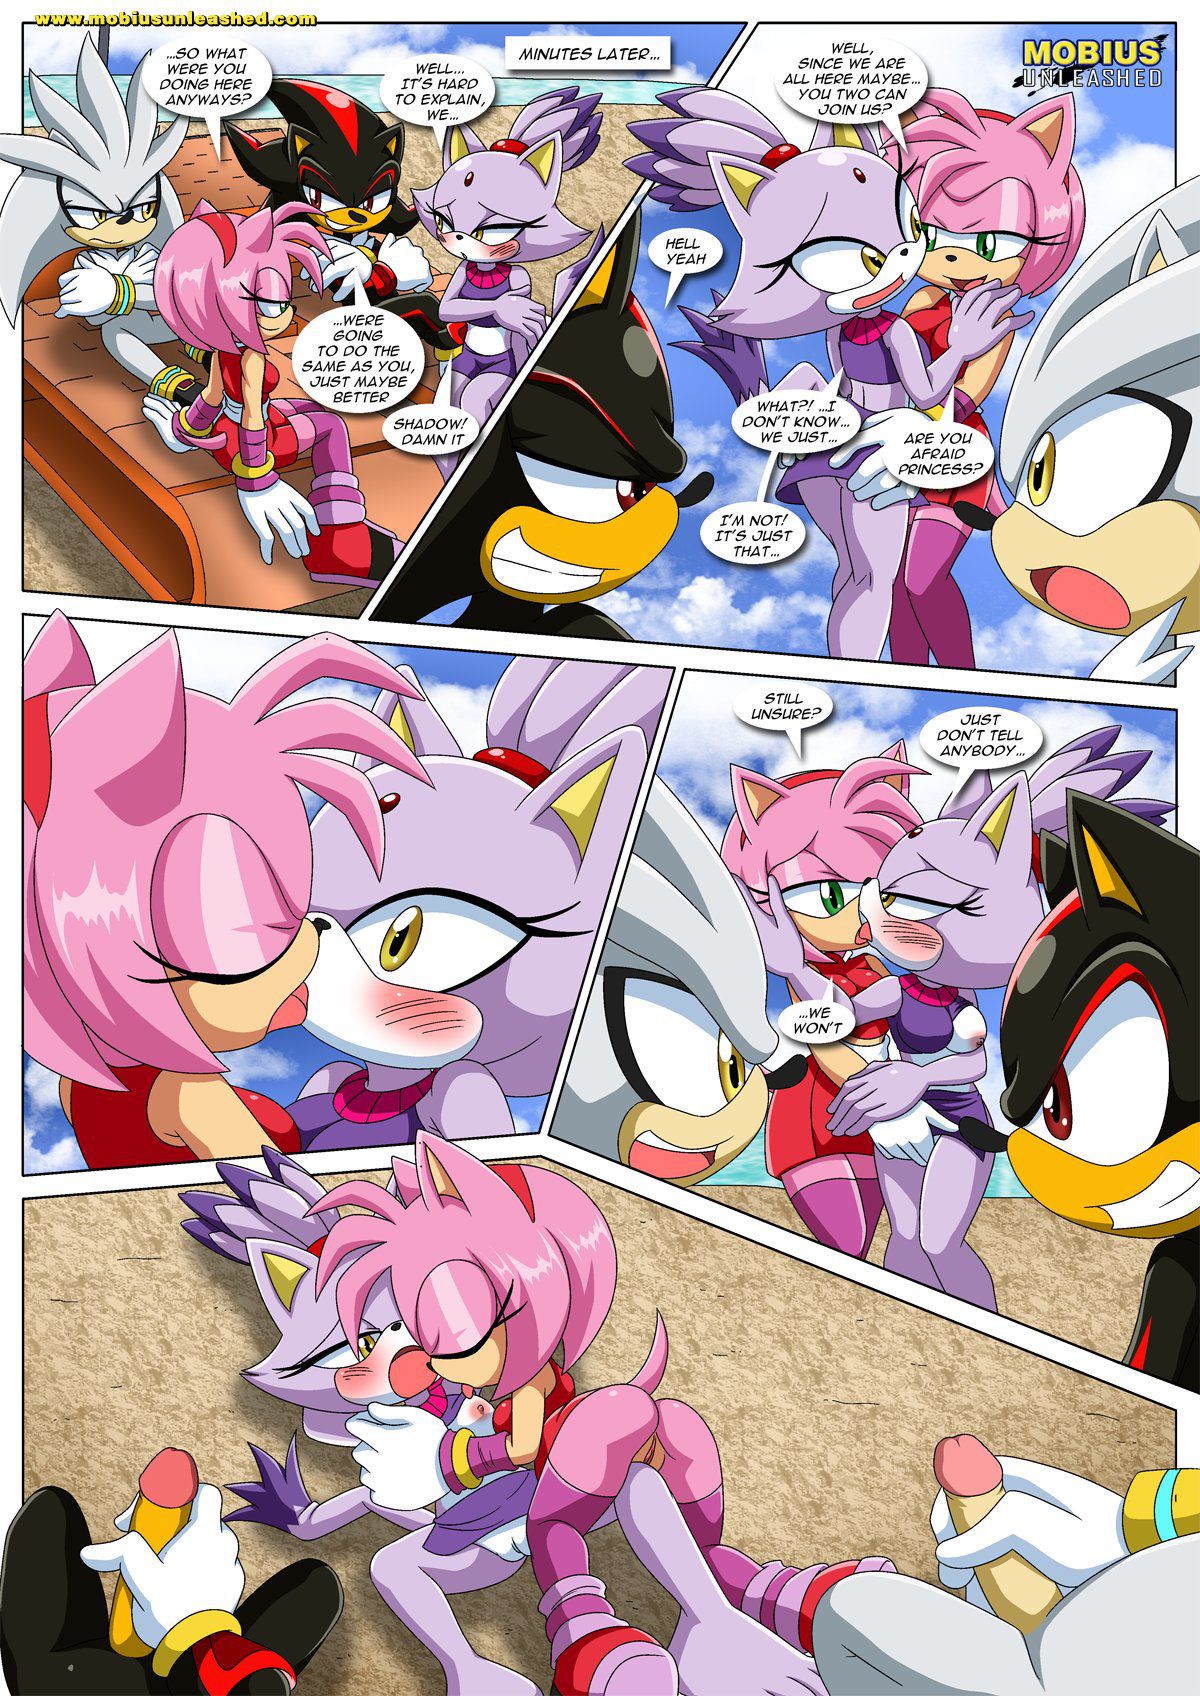 [Palcomix] Sonic Project XXX 4 (Sonic The Hedgehog) [Ongoing] 6